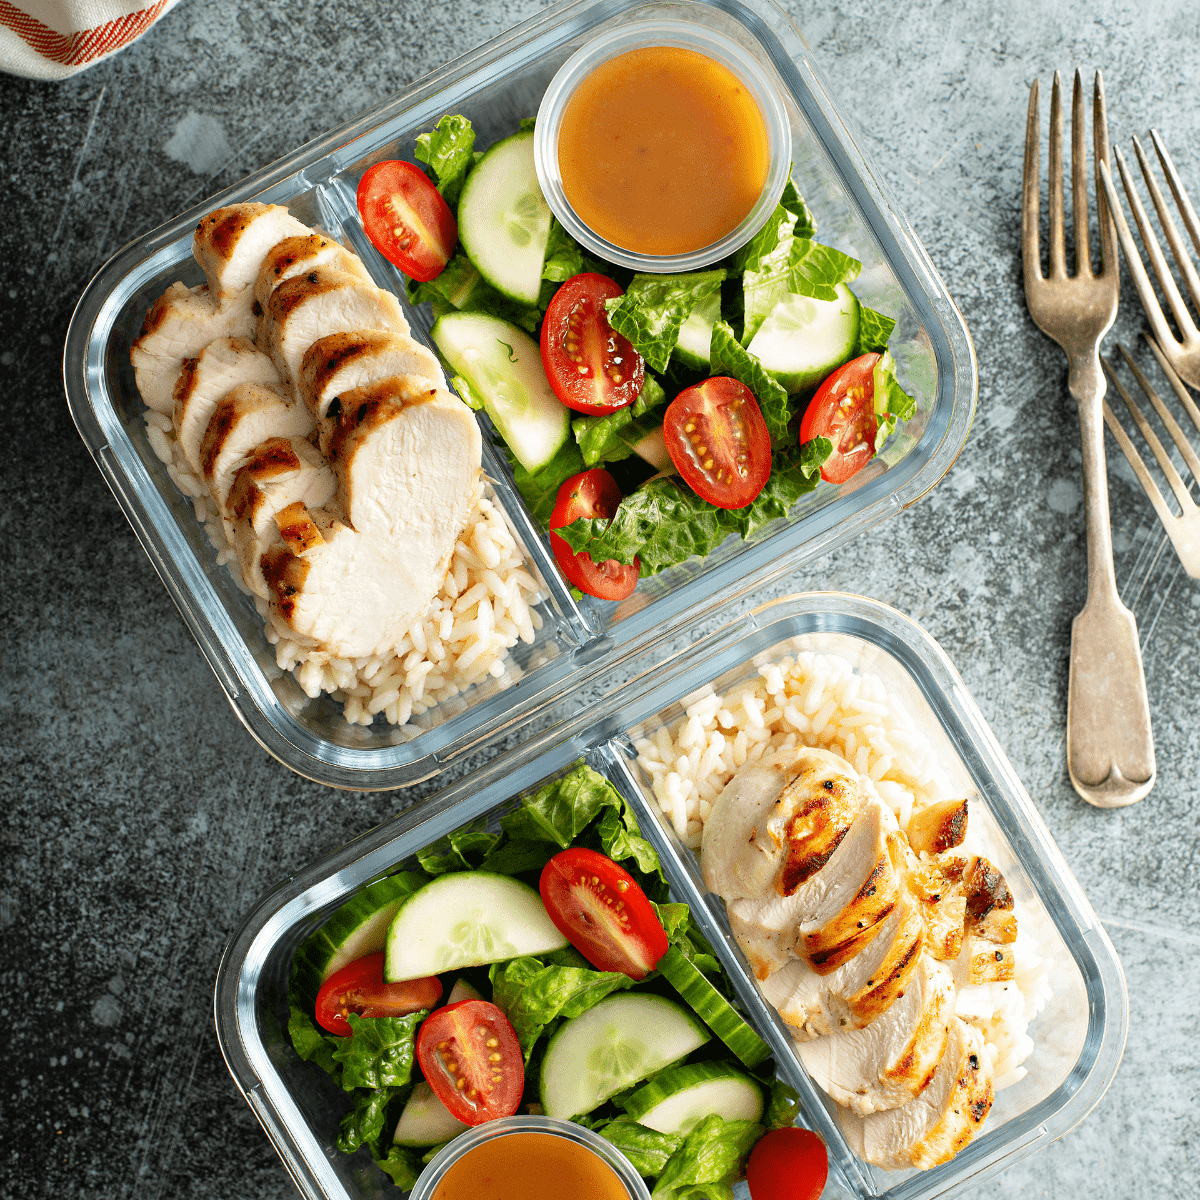 salad and chicken in meal prep container.